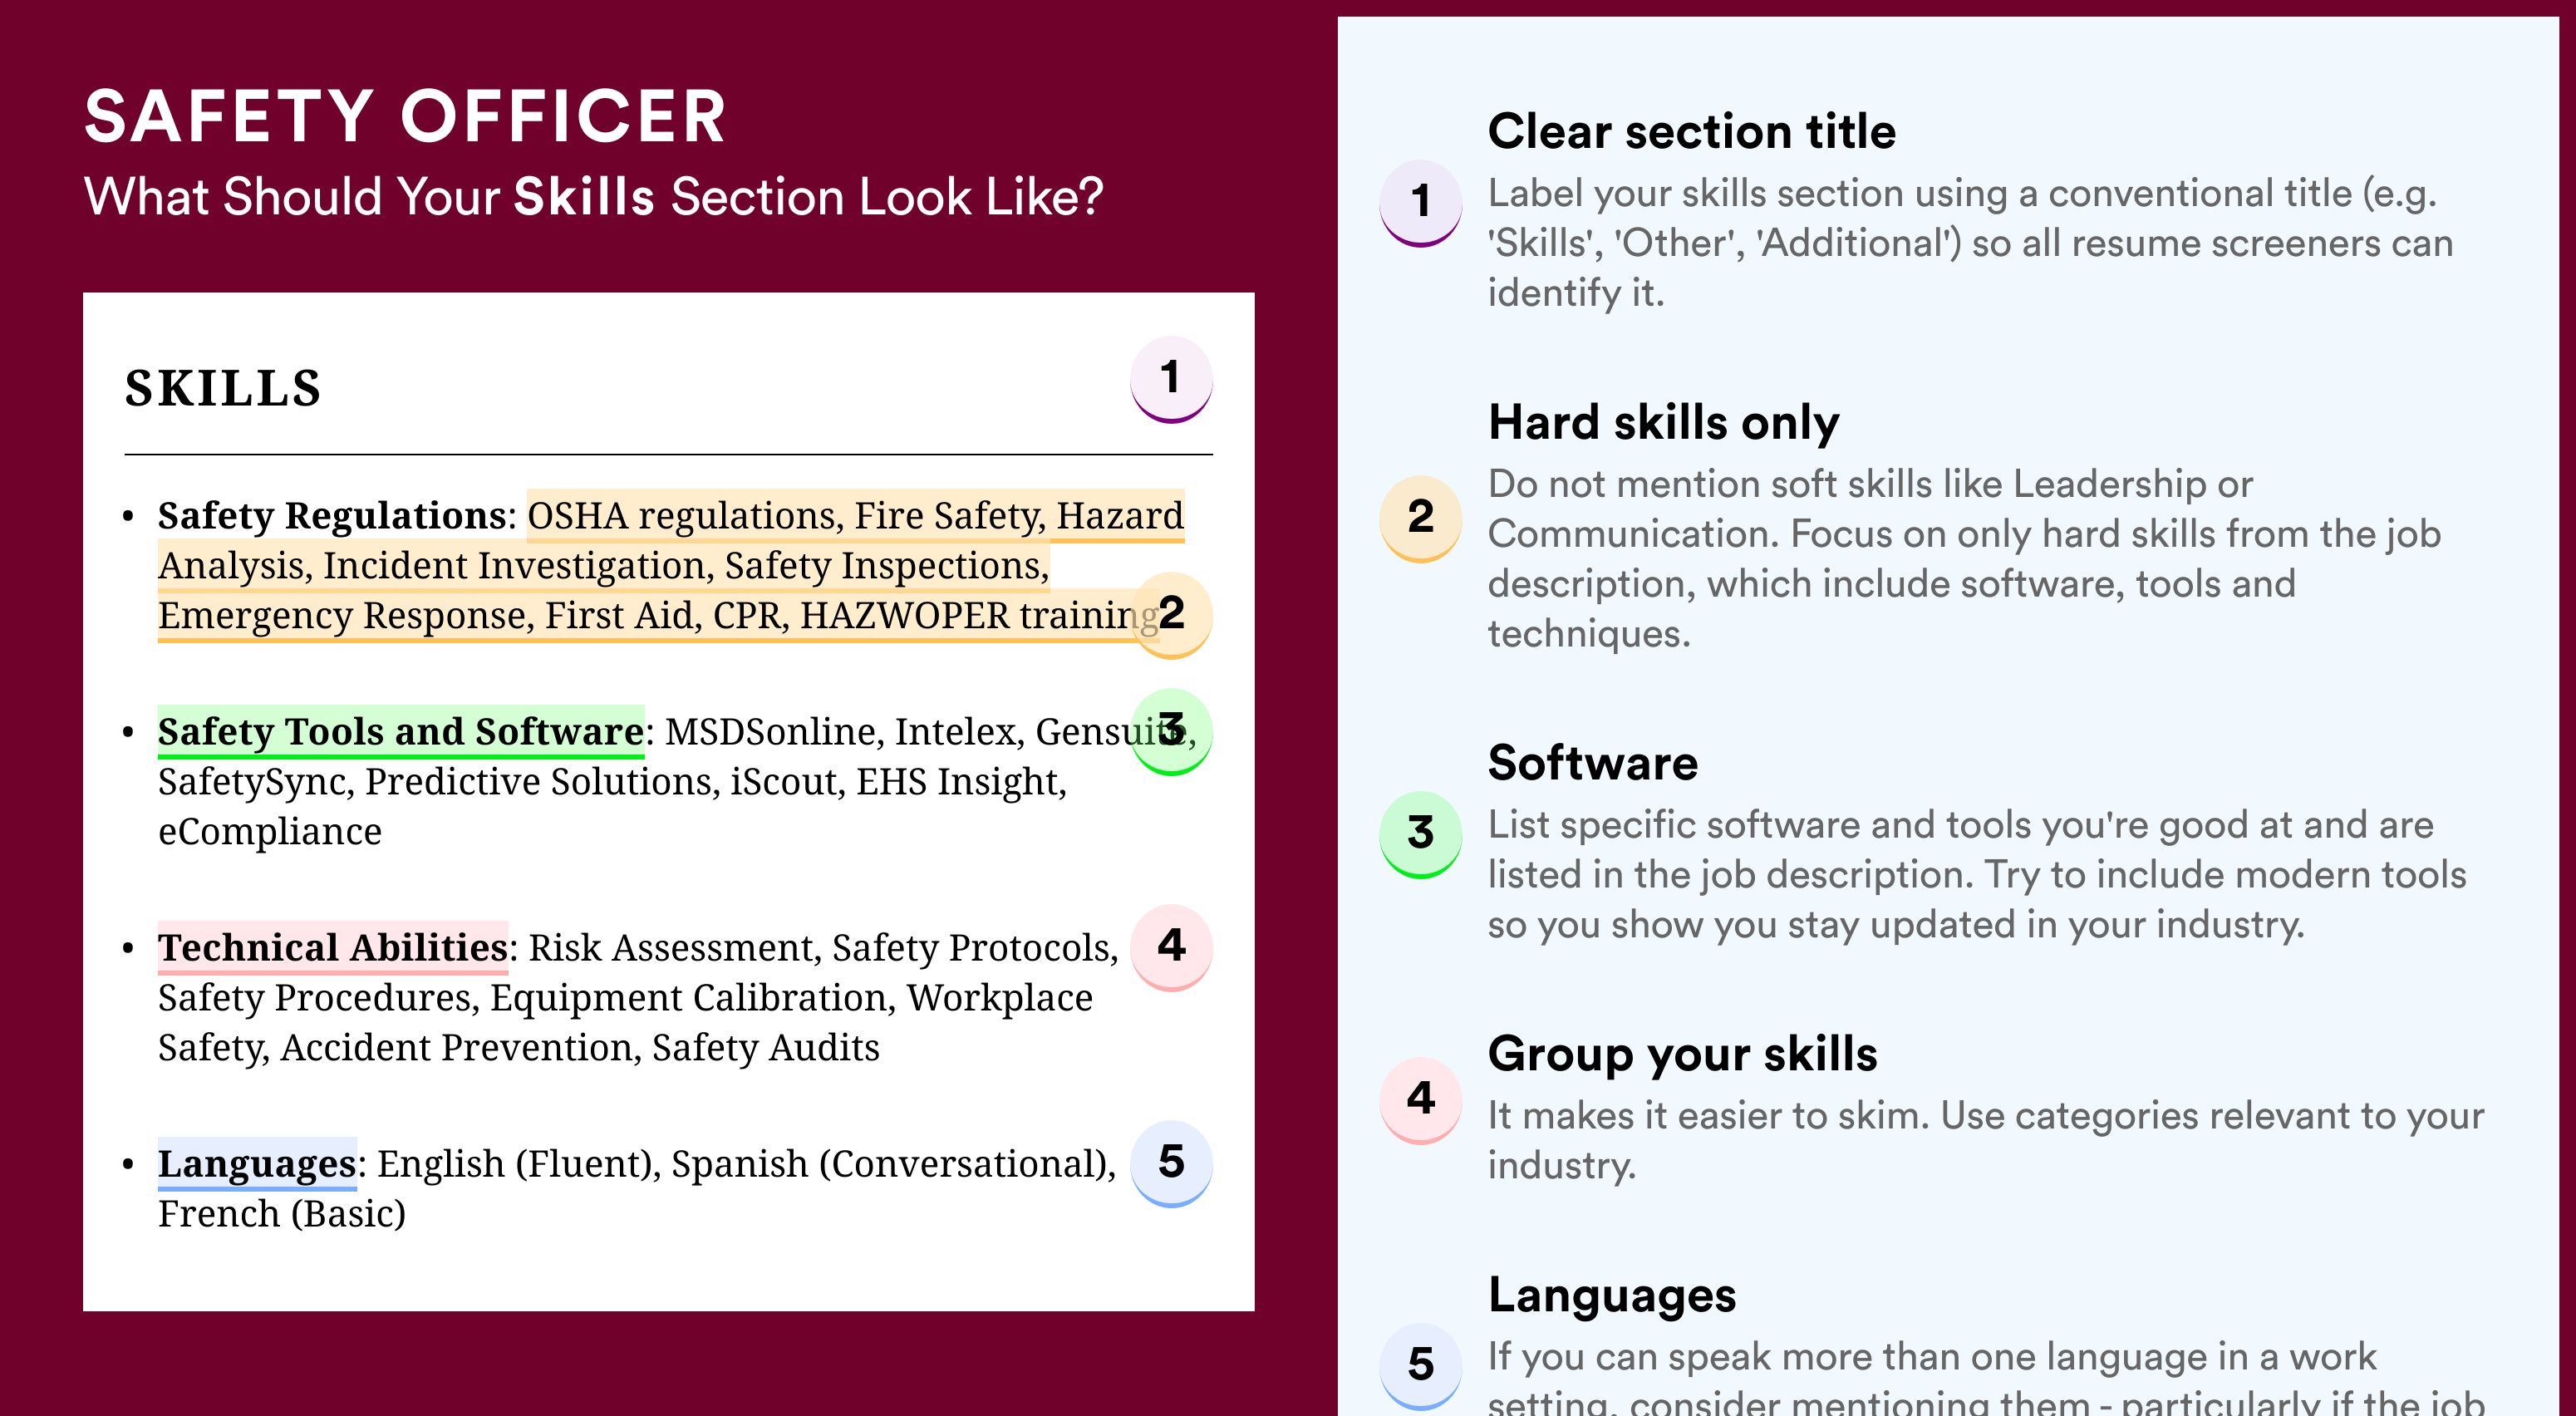 How To Write Your Skills Section - Safety Officer Roles